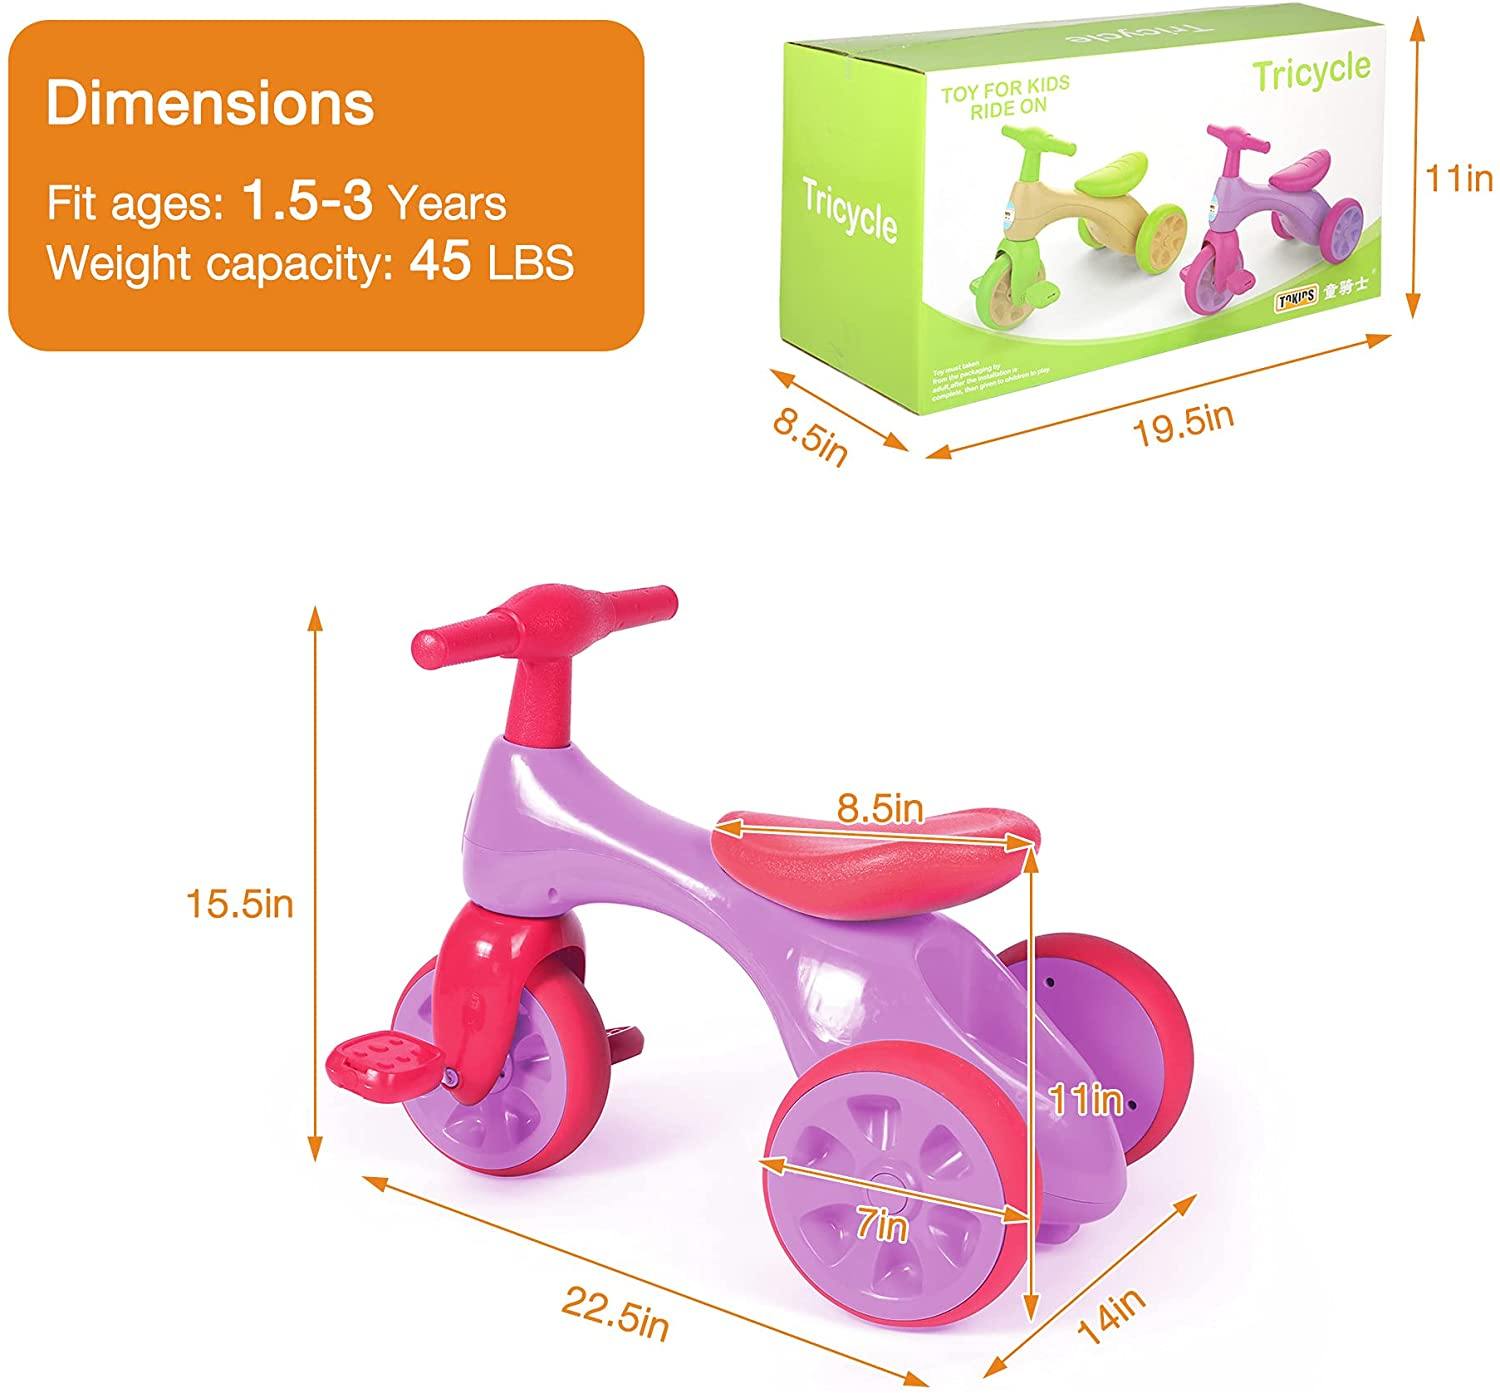 Toddler Tricycle Kids 3-Wheel Ride-on Toy Trike - Baby Balance Walker Slide Bike Bicycle with Foot Pedals for kids, Rose red - Bosonshop